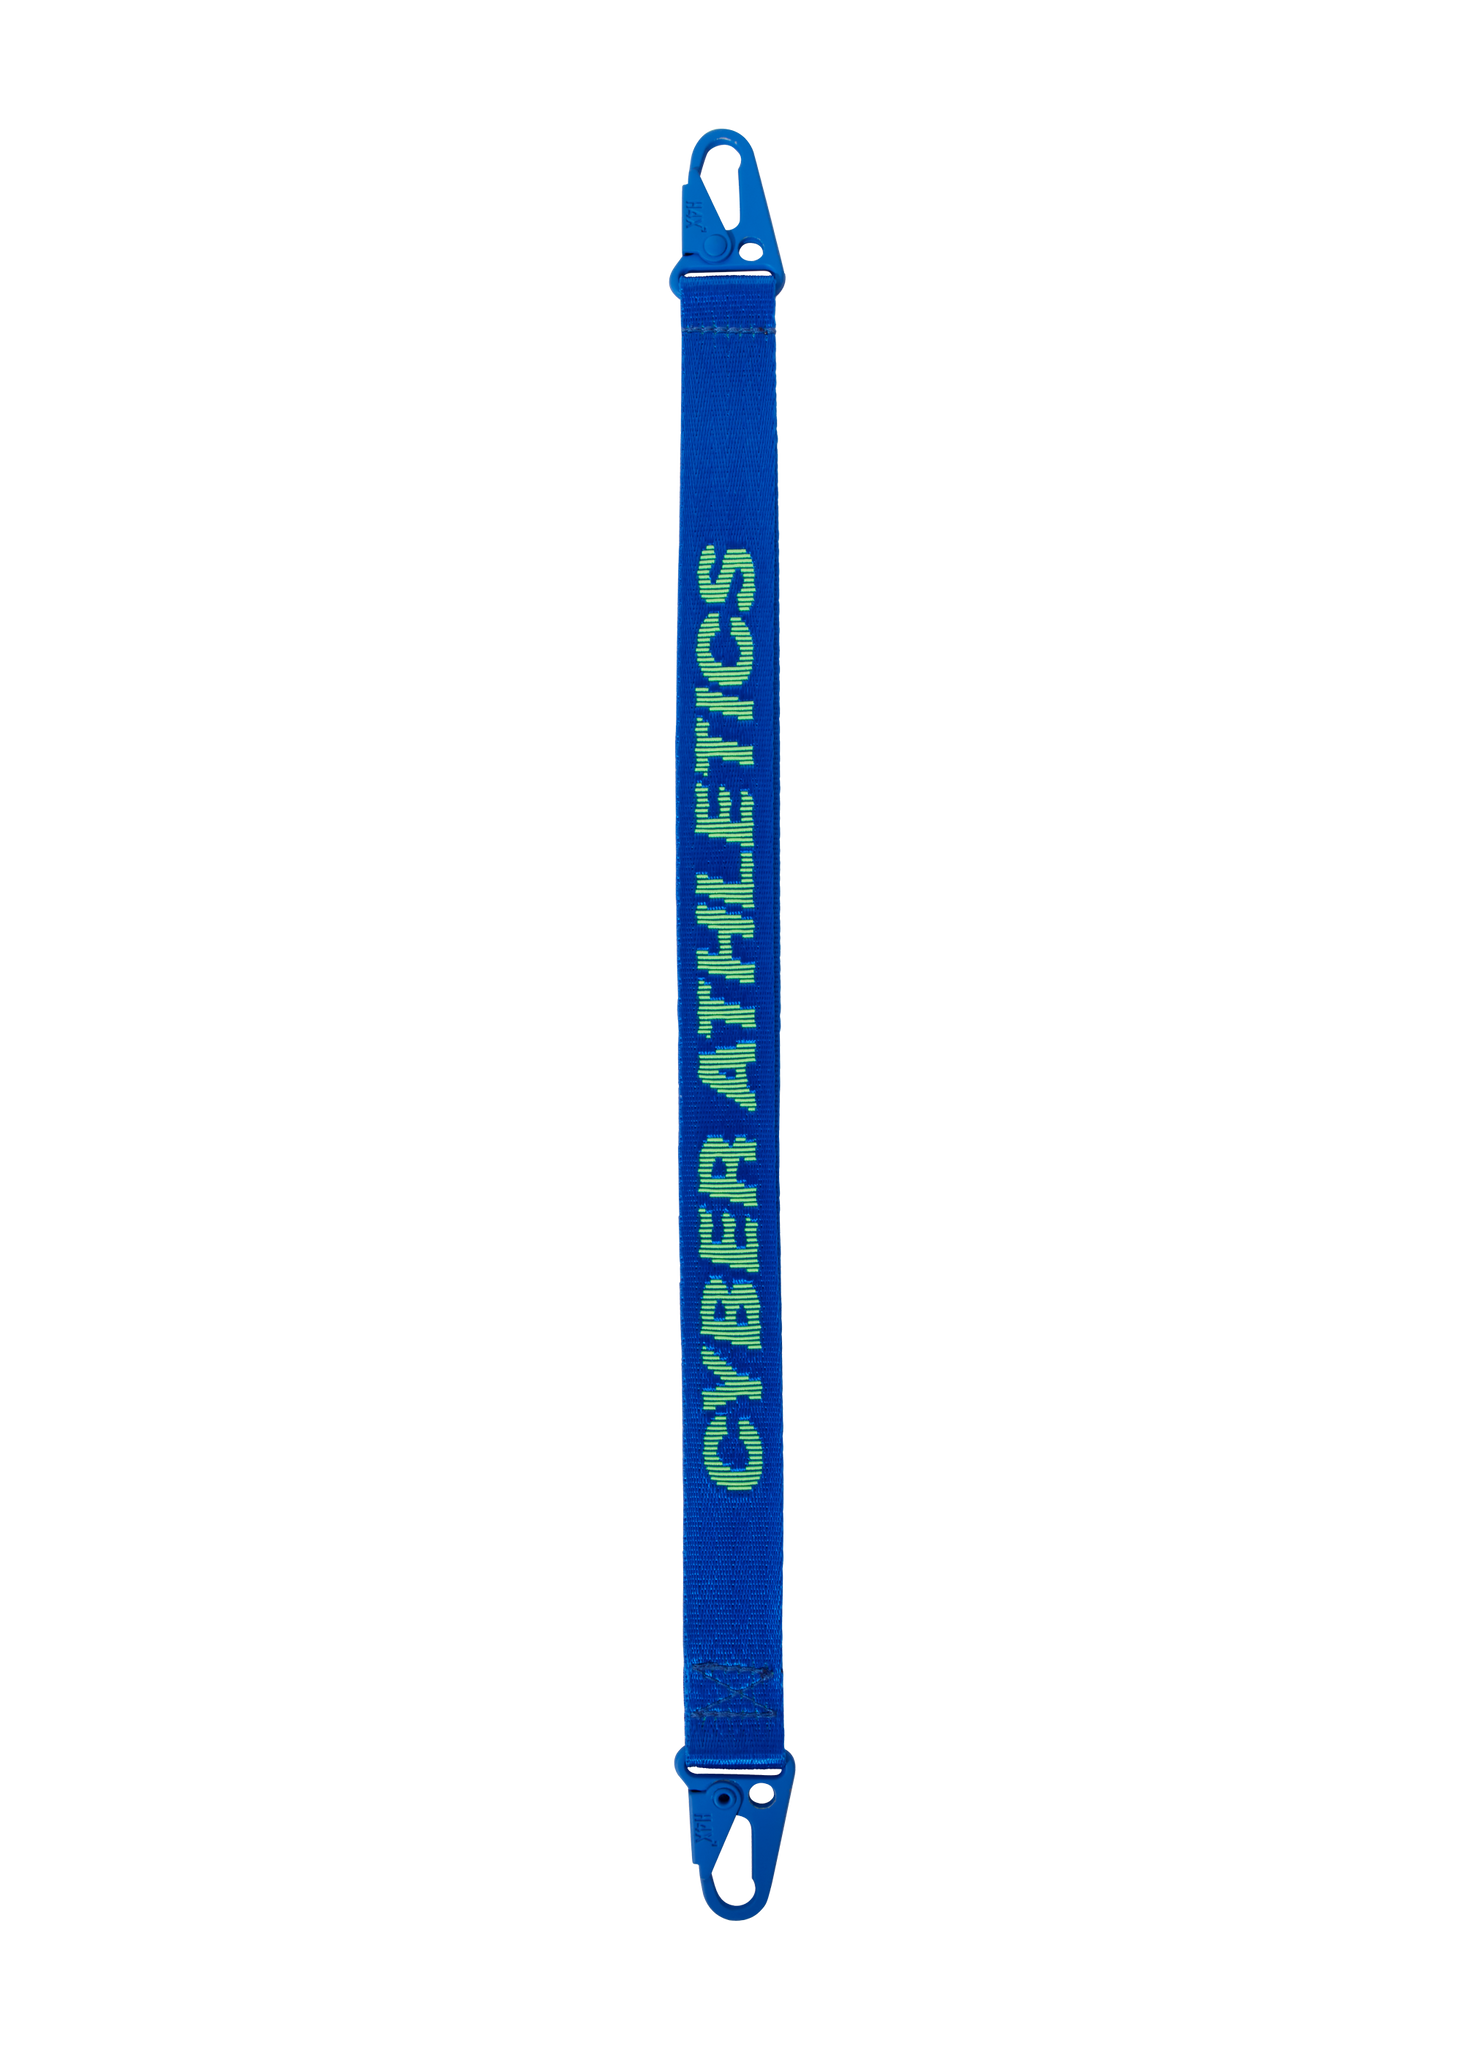 H4X Cyber Athletics Quick Release Blue Lanyard - H4X